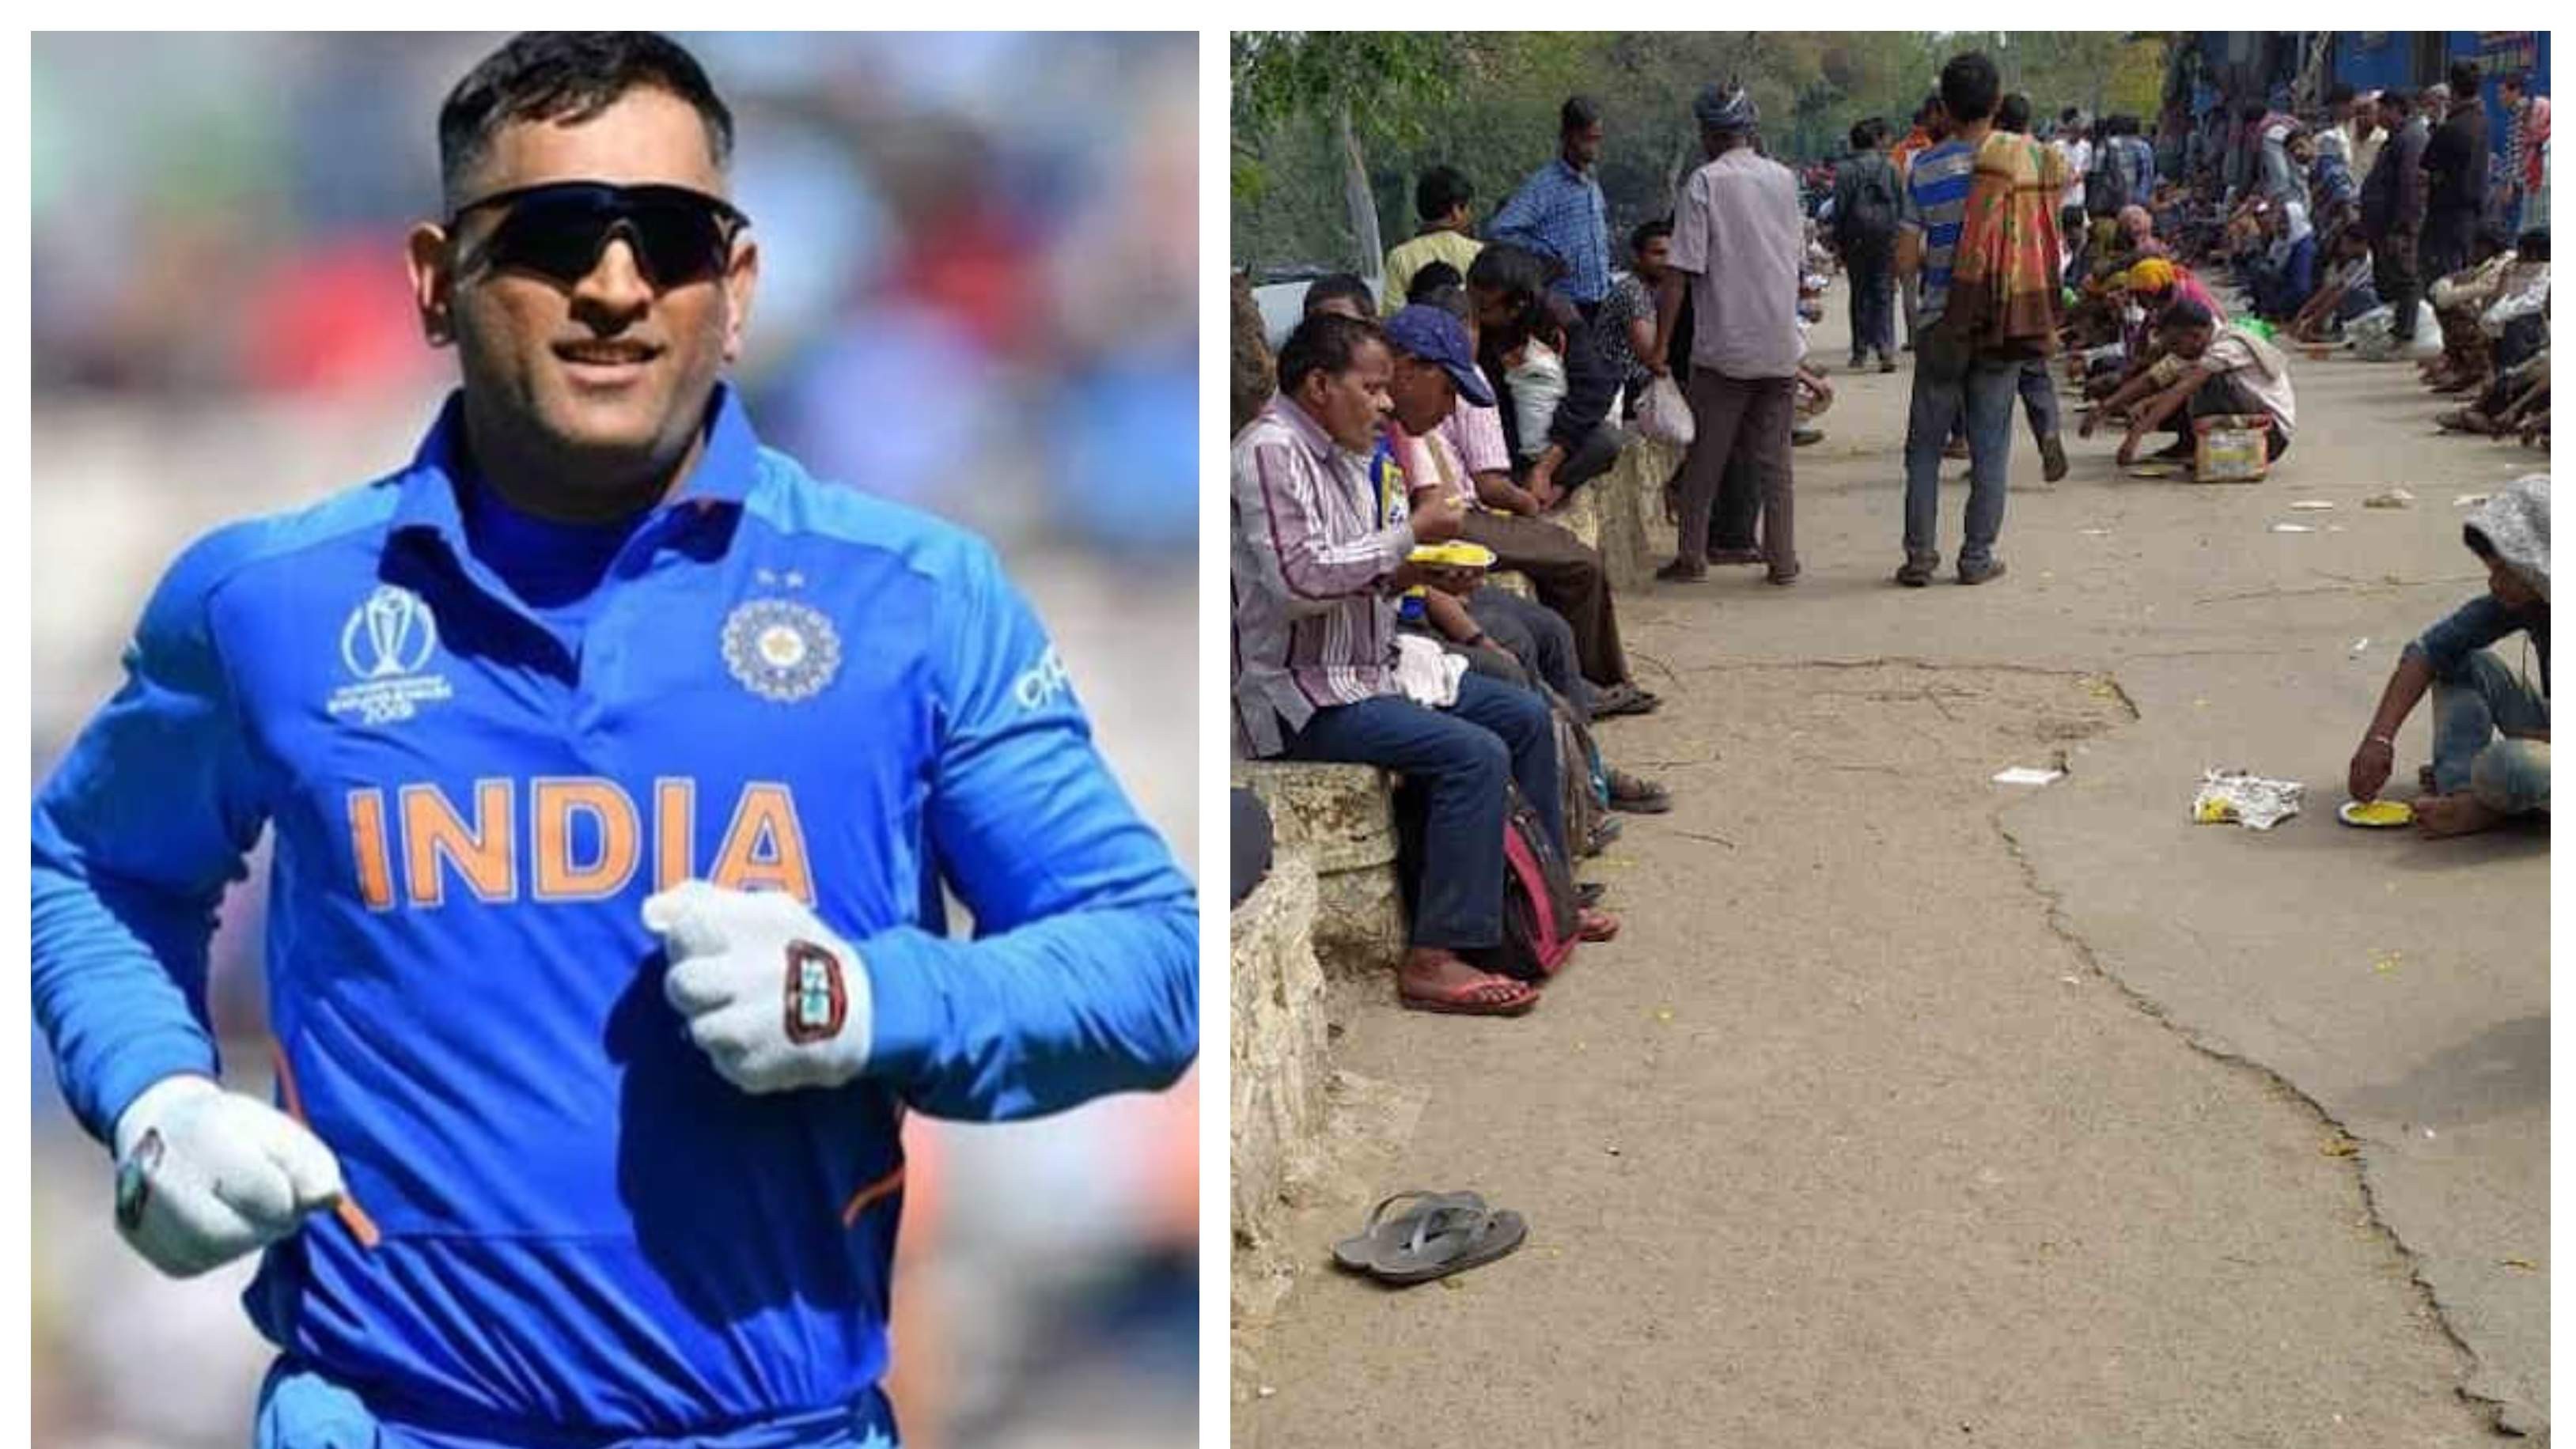 Here’s why Dhoni contributed just 1 Lakh to help Pune’s daily wage workers amid COVID-19 crisis